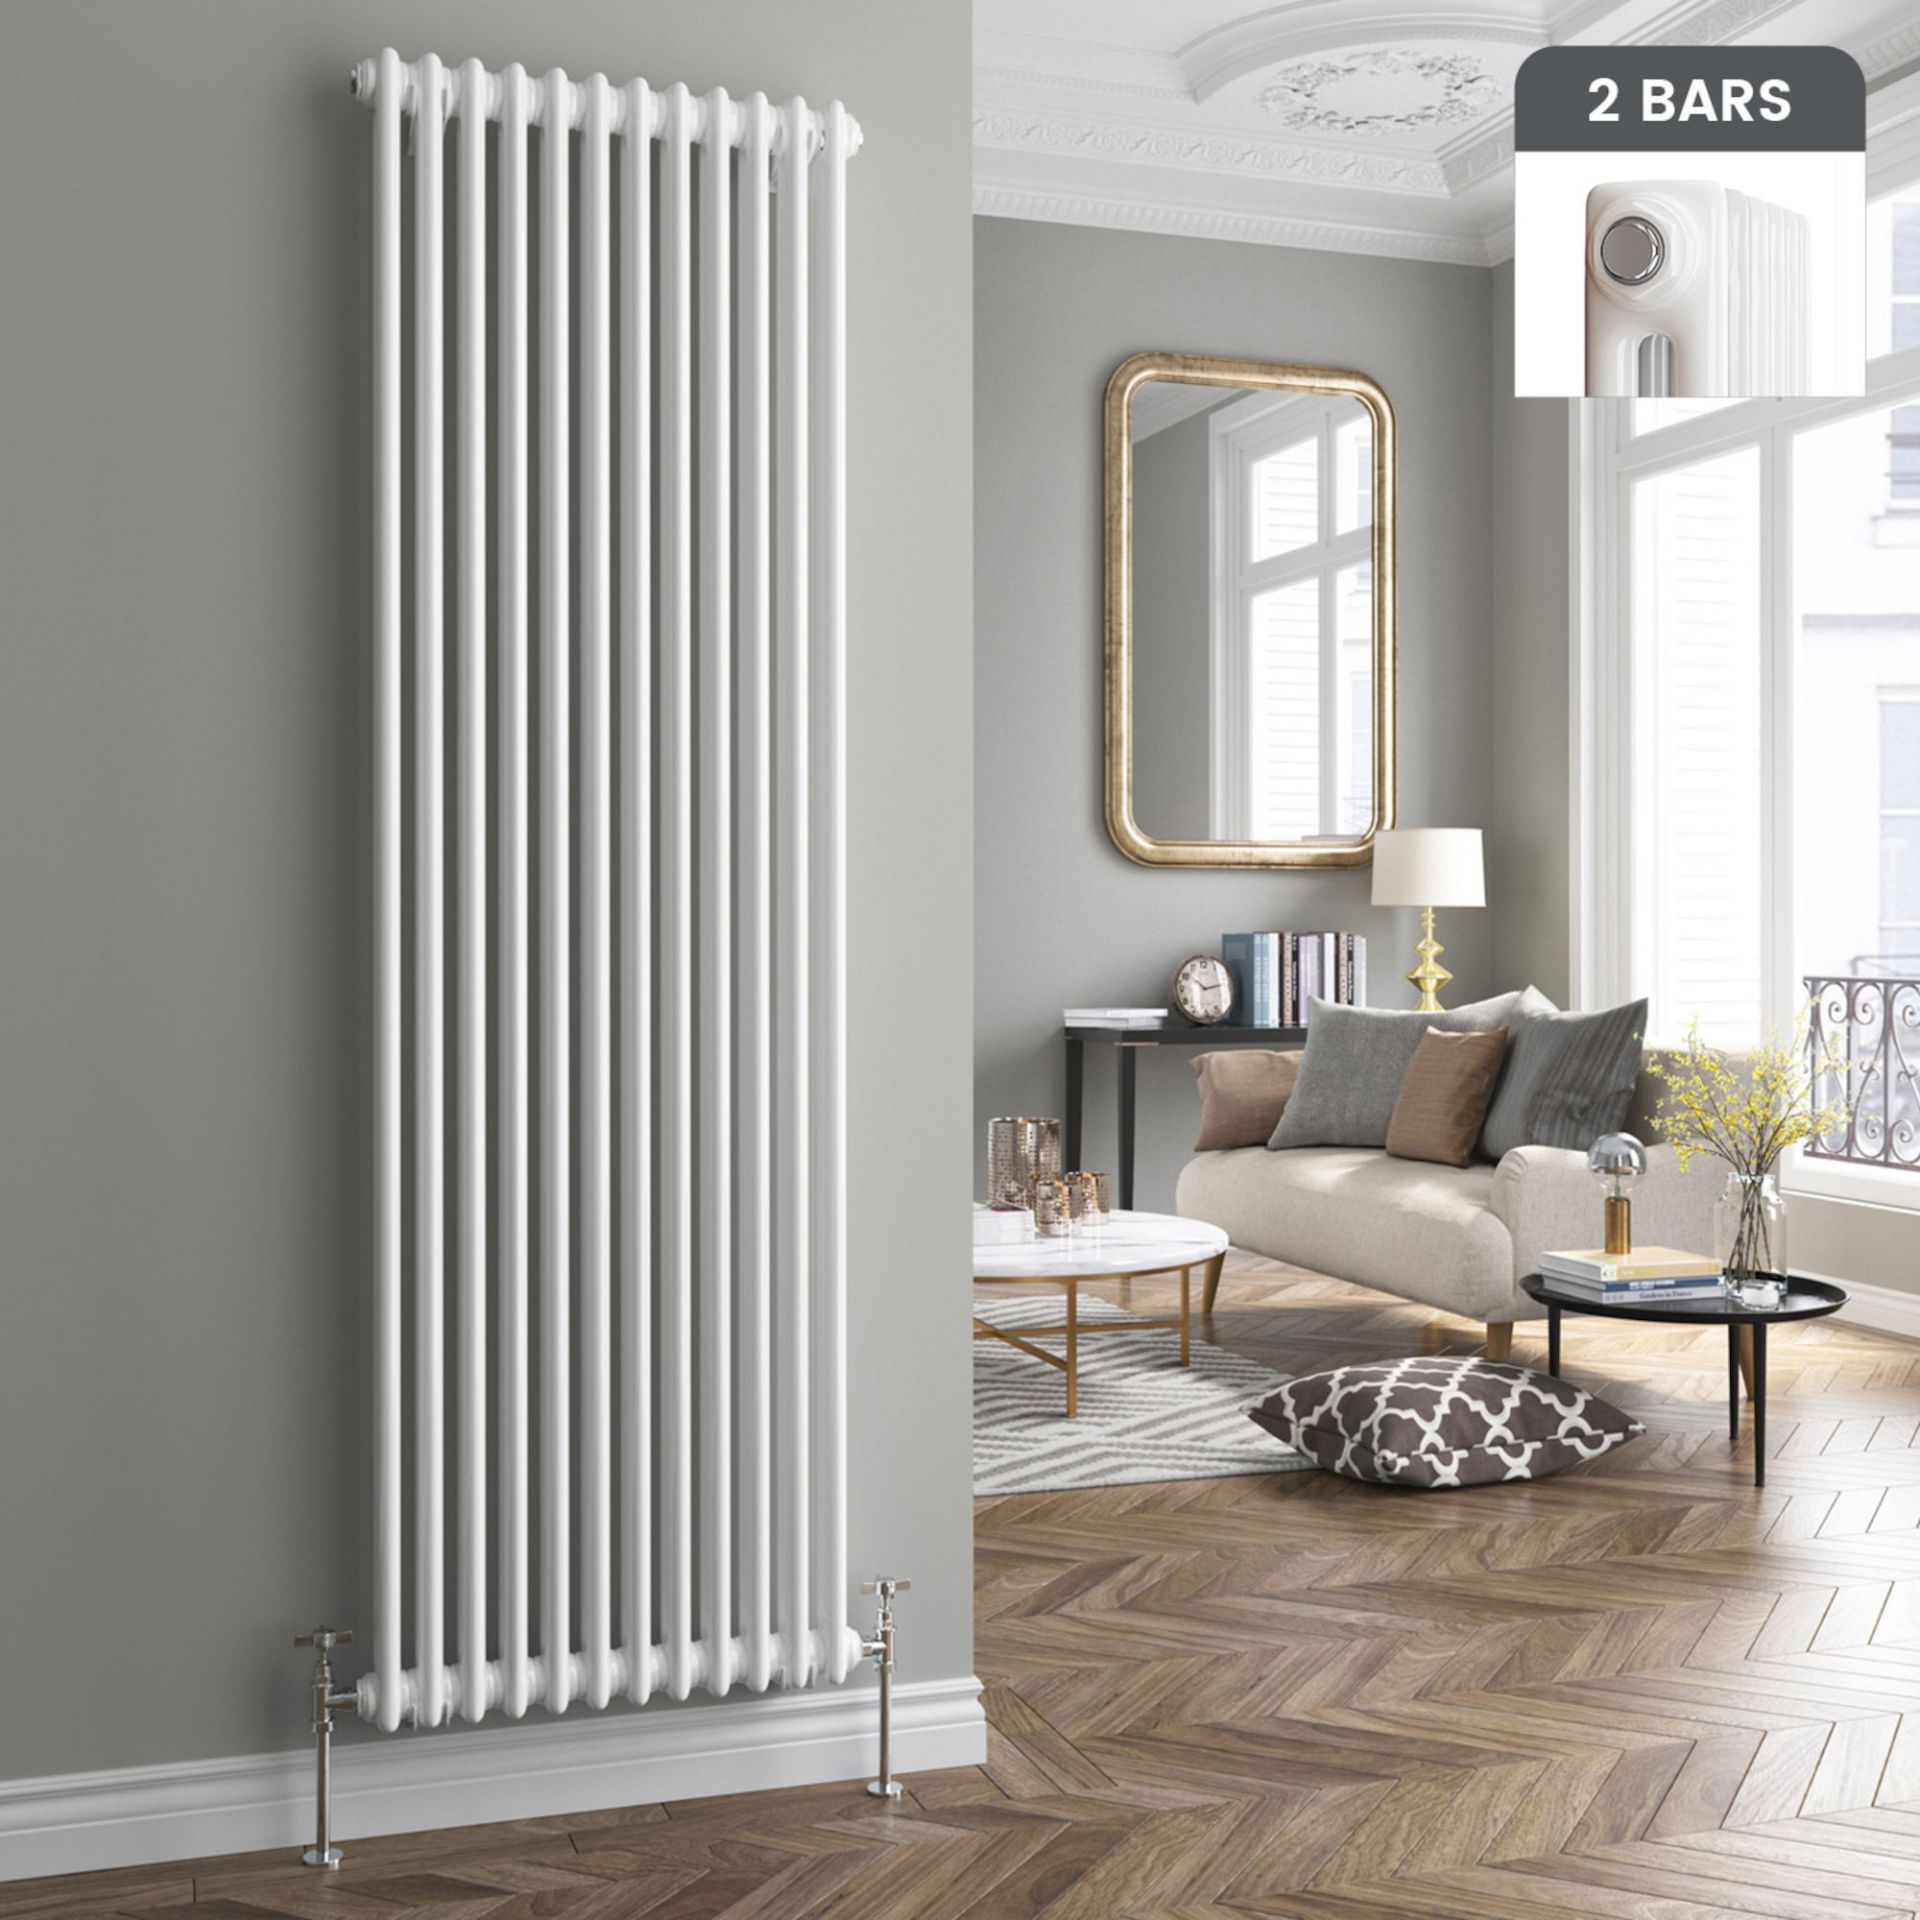 (AA136) 2000x490mm White Double Panel Vertical Colosseum Traditional Radiator. RRP £519.99. ...